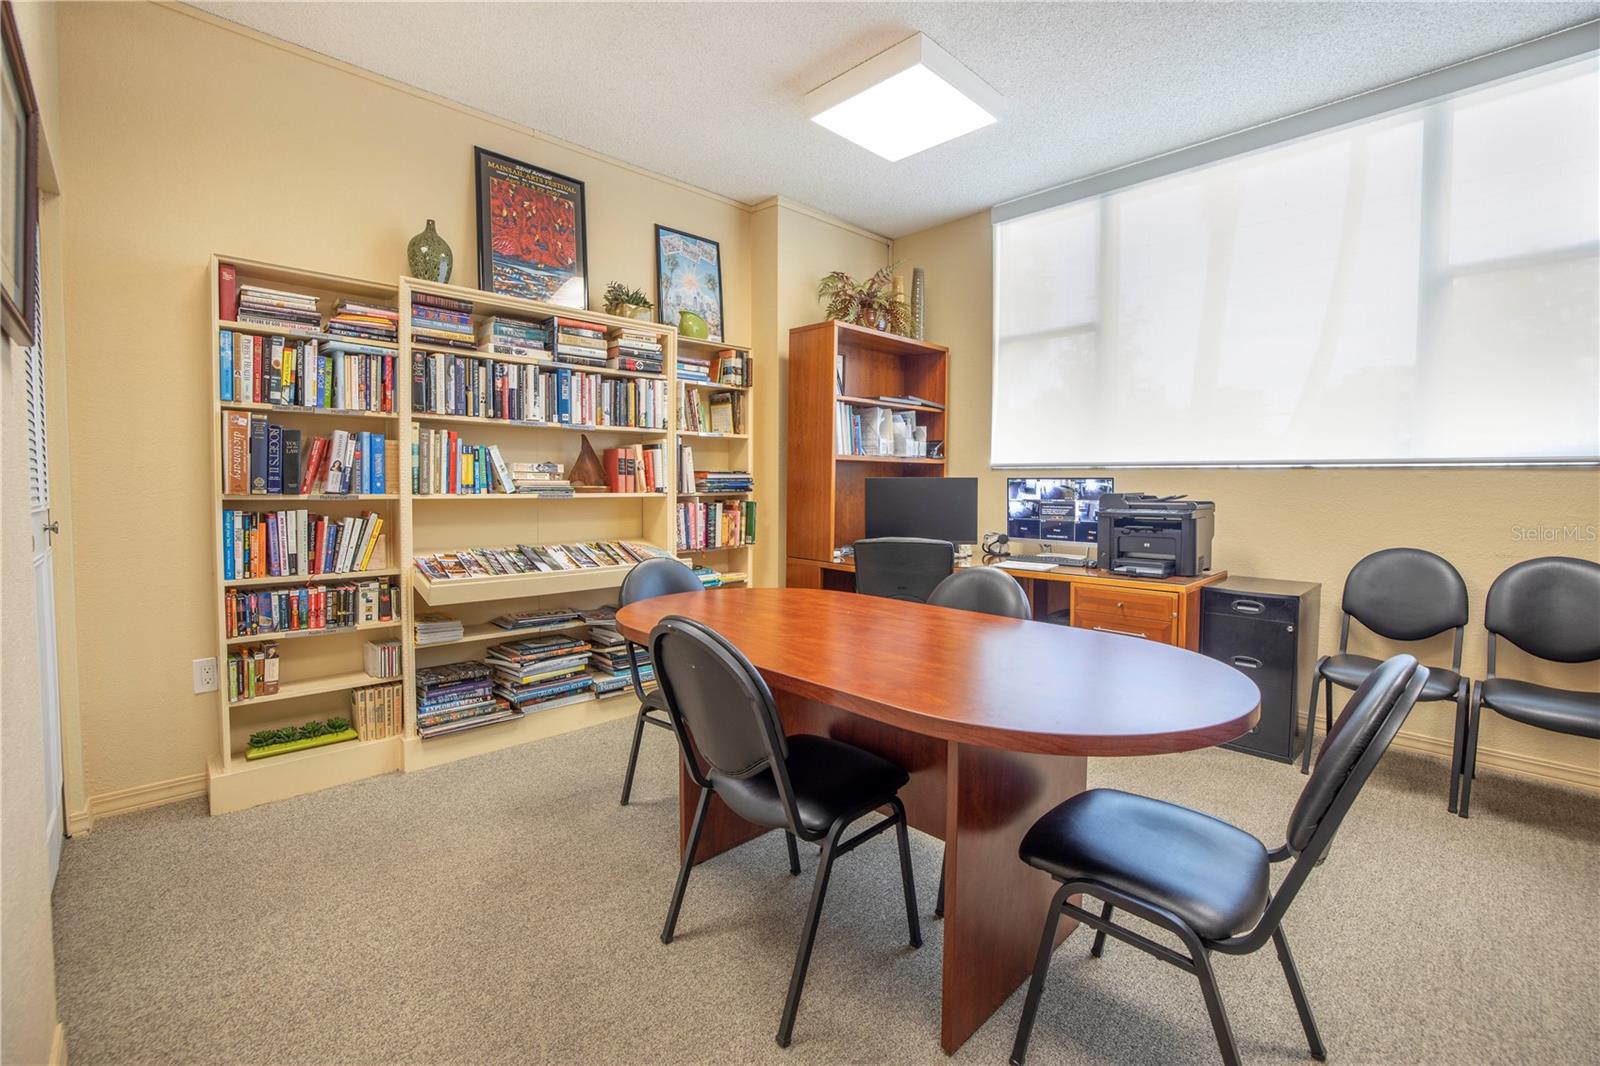 Library / Meeting Room